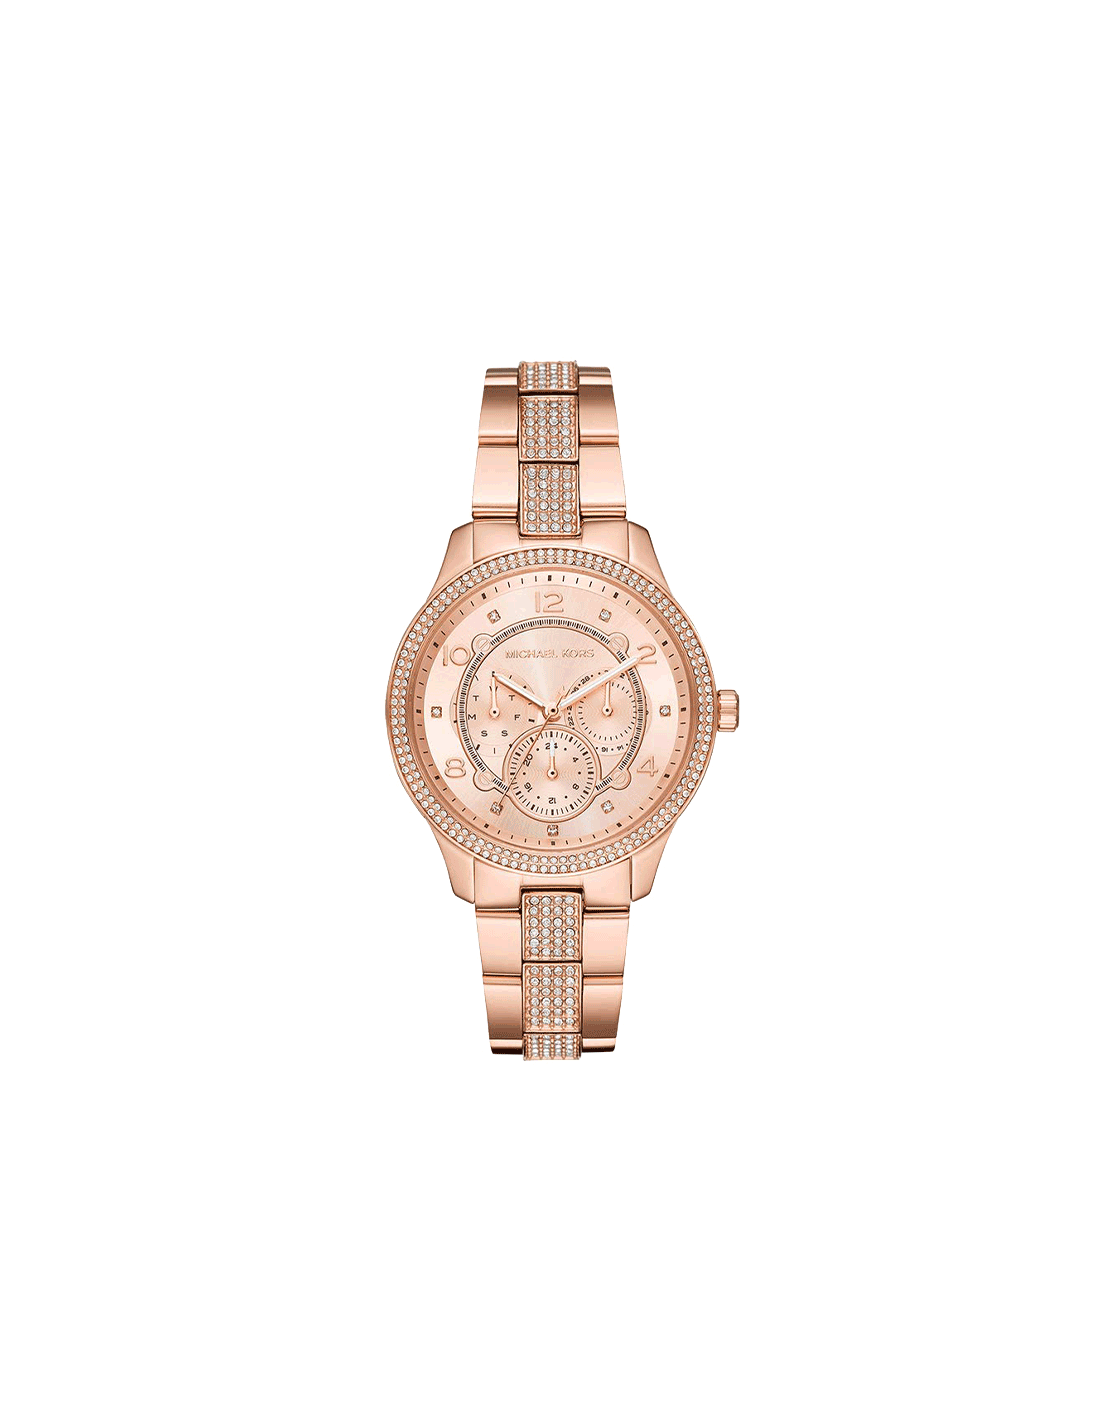 Buy Michael Kors MK9063 Watch in India I Swiss Time House